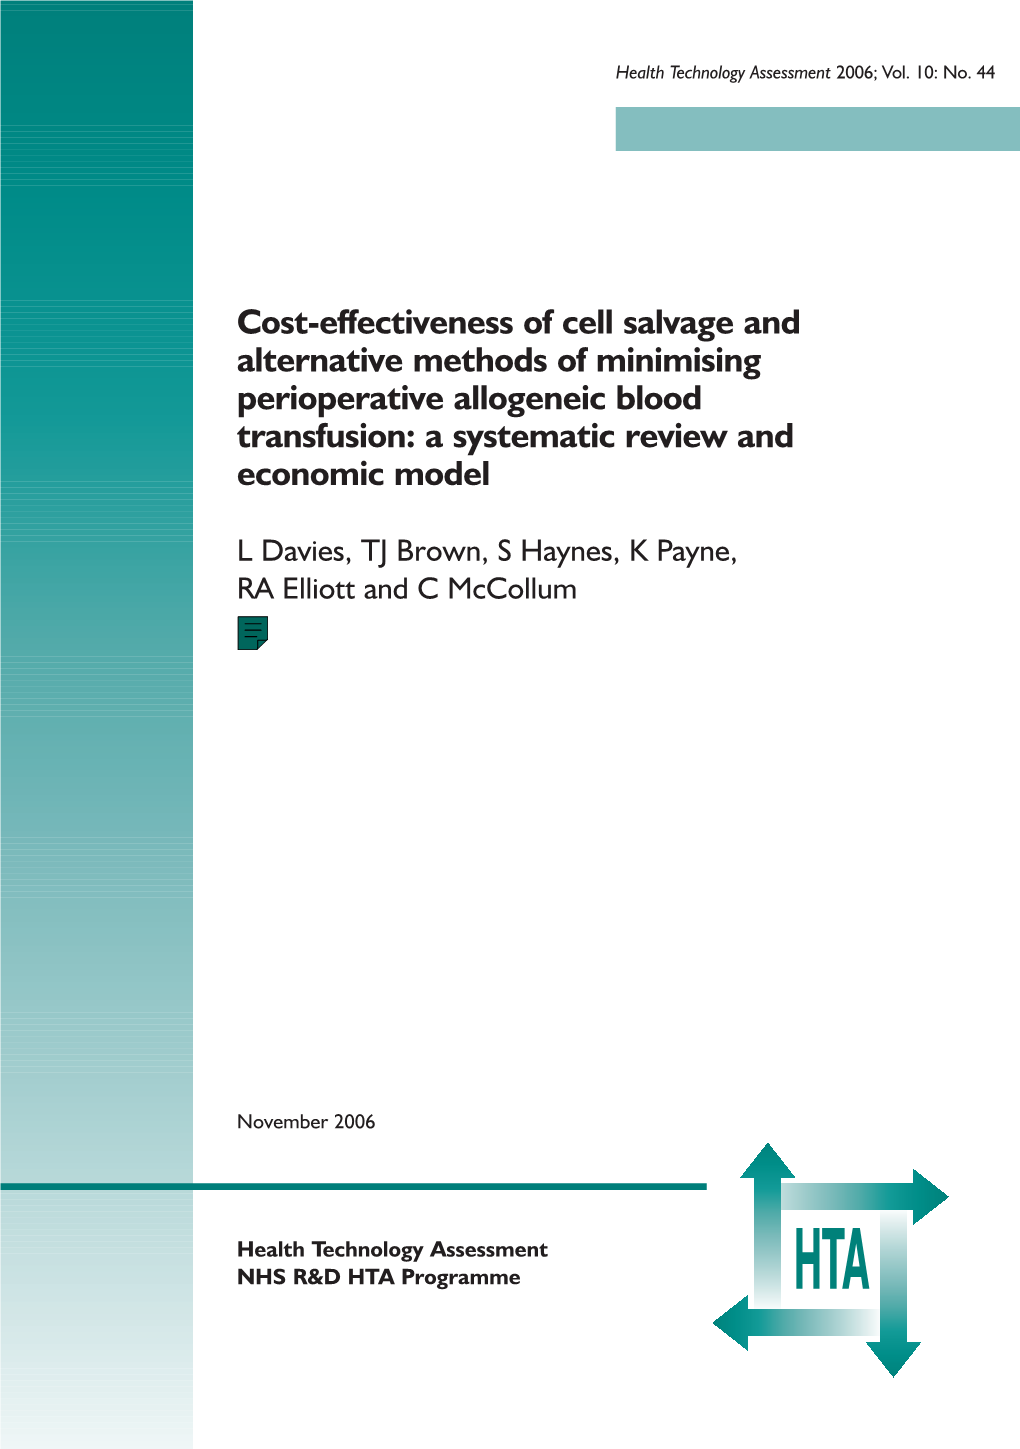 Cell Salvage and Alternative Methods of Minimising Perioperative Allogeneic Blood Transfusion ISSN 1366-5278 Feedback Your Views About This Report